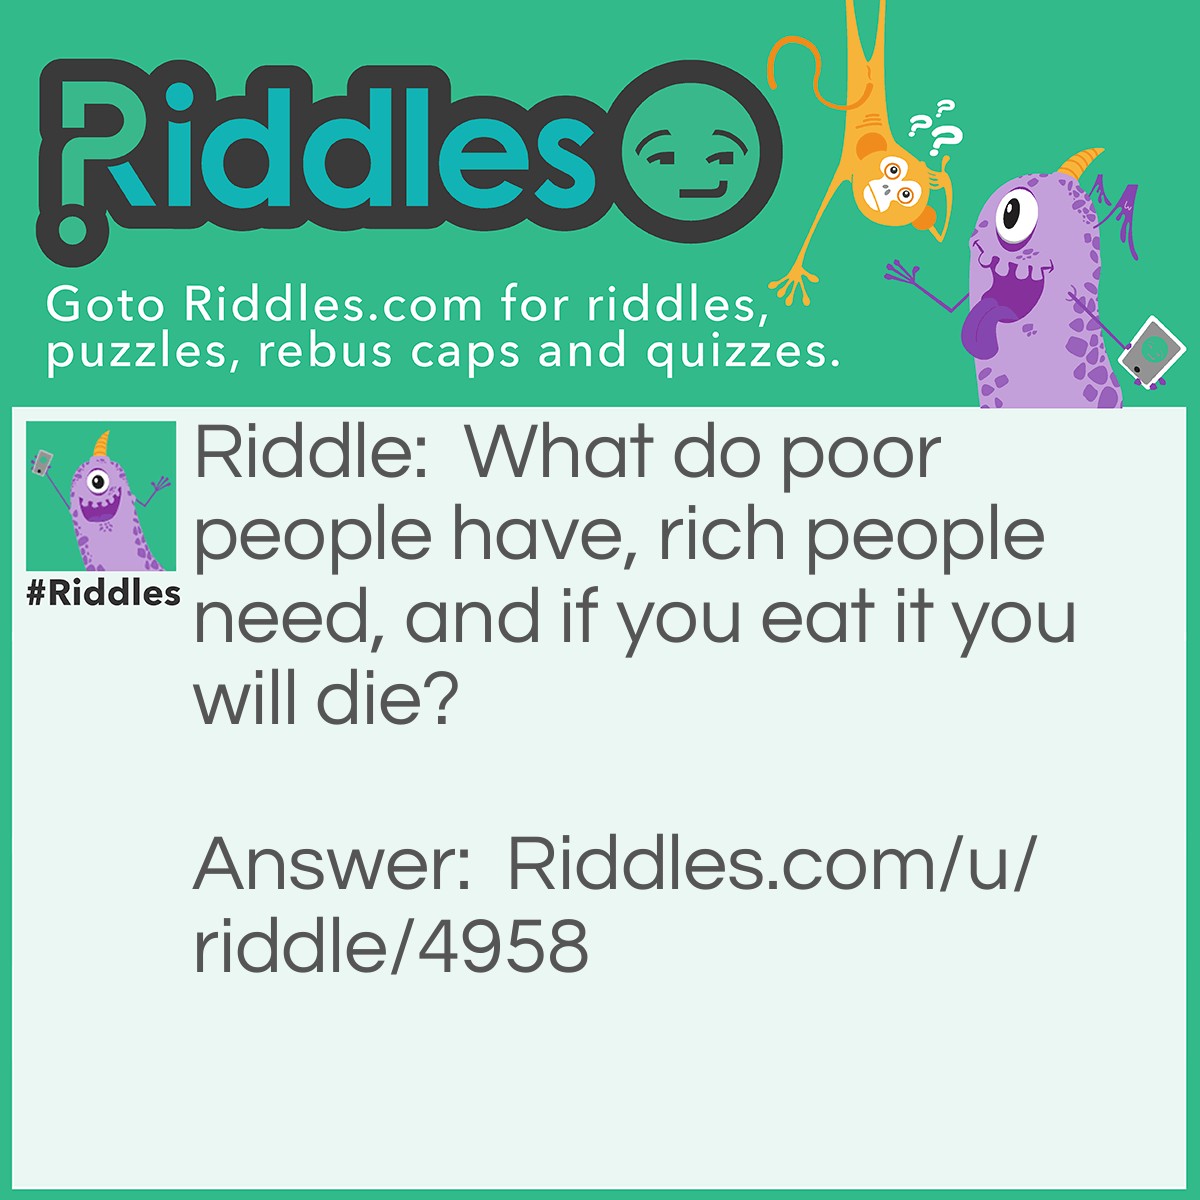 Riddle: What do poor people have, rich people need, and if you eat it you will die? Answer: Nothing.